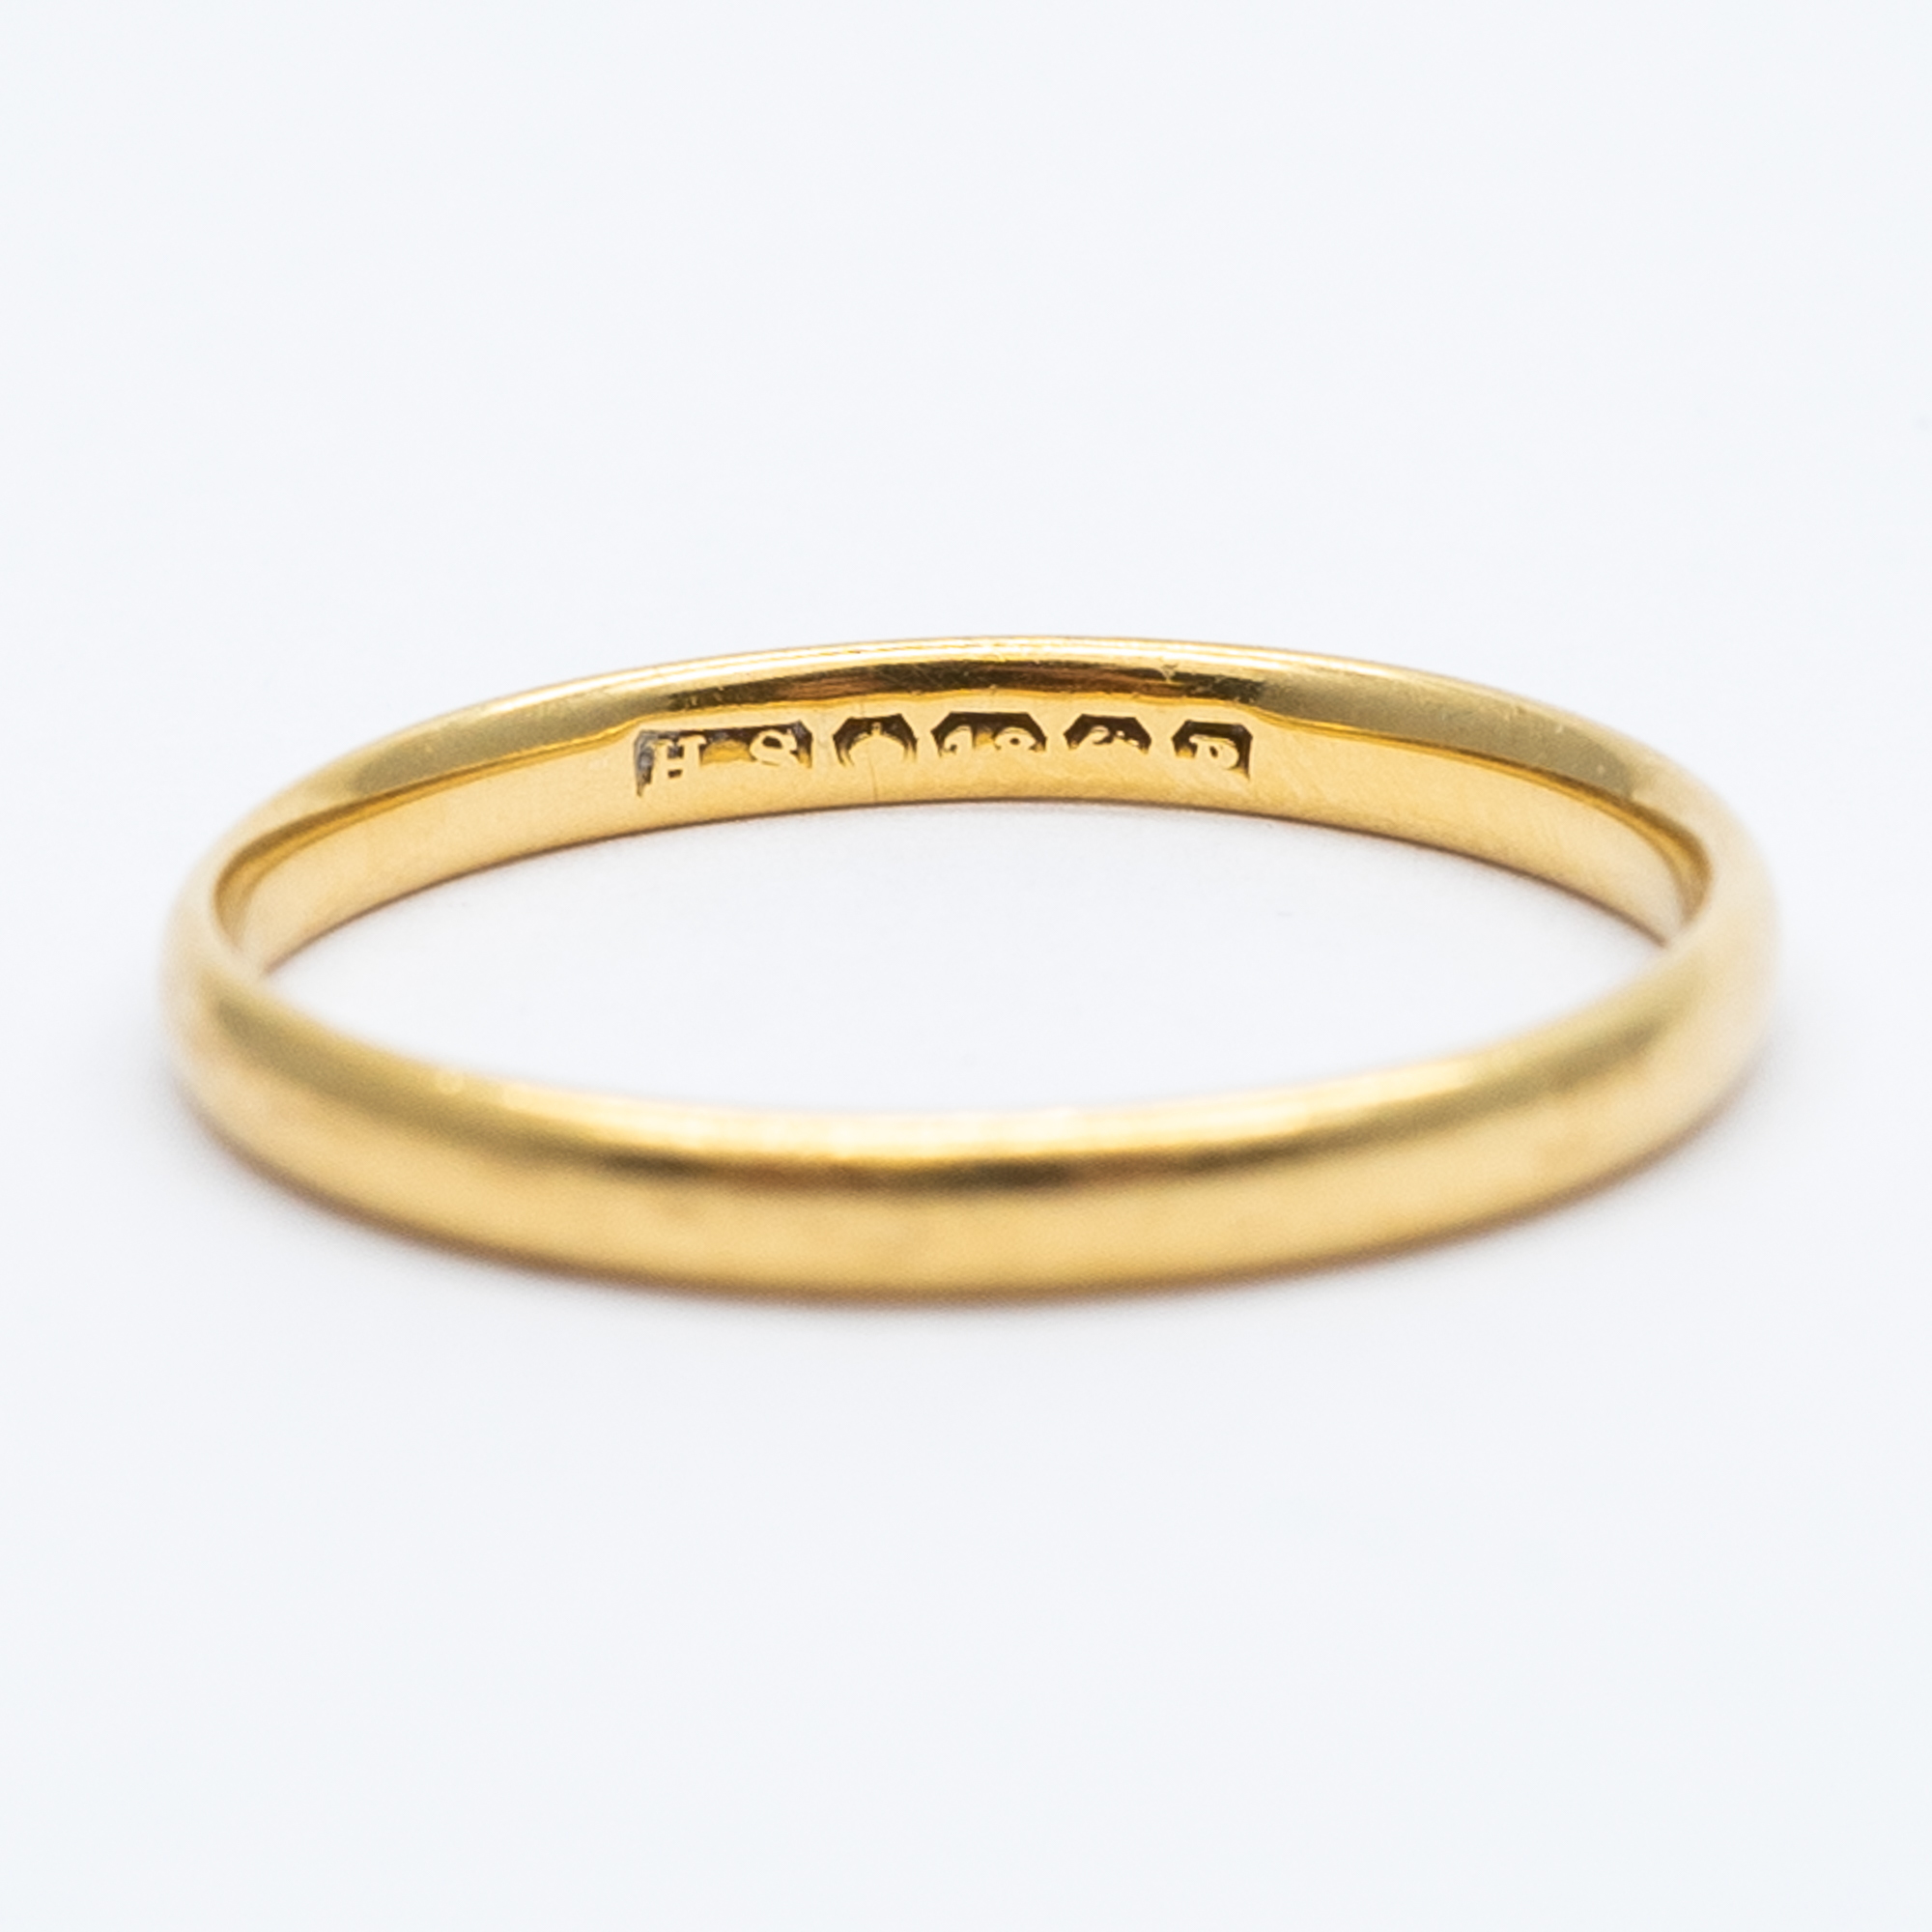 An 18ct yellow gold wedding band - Image 2 of 3